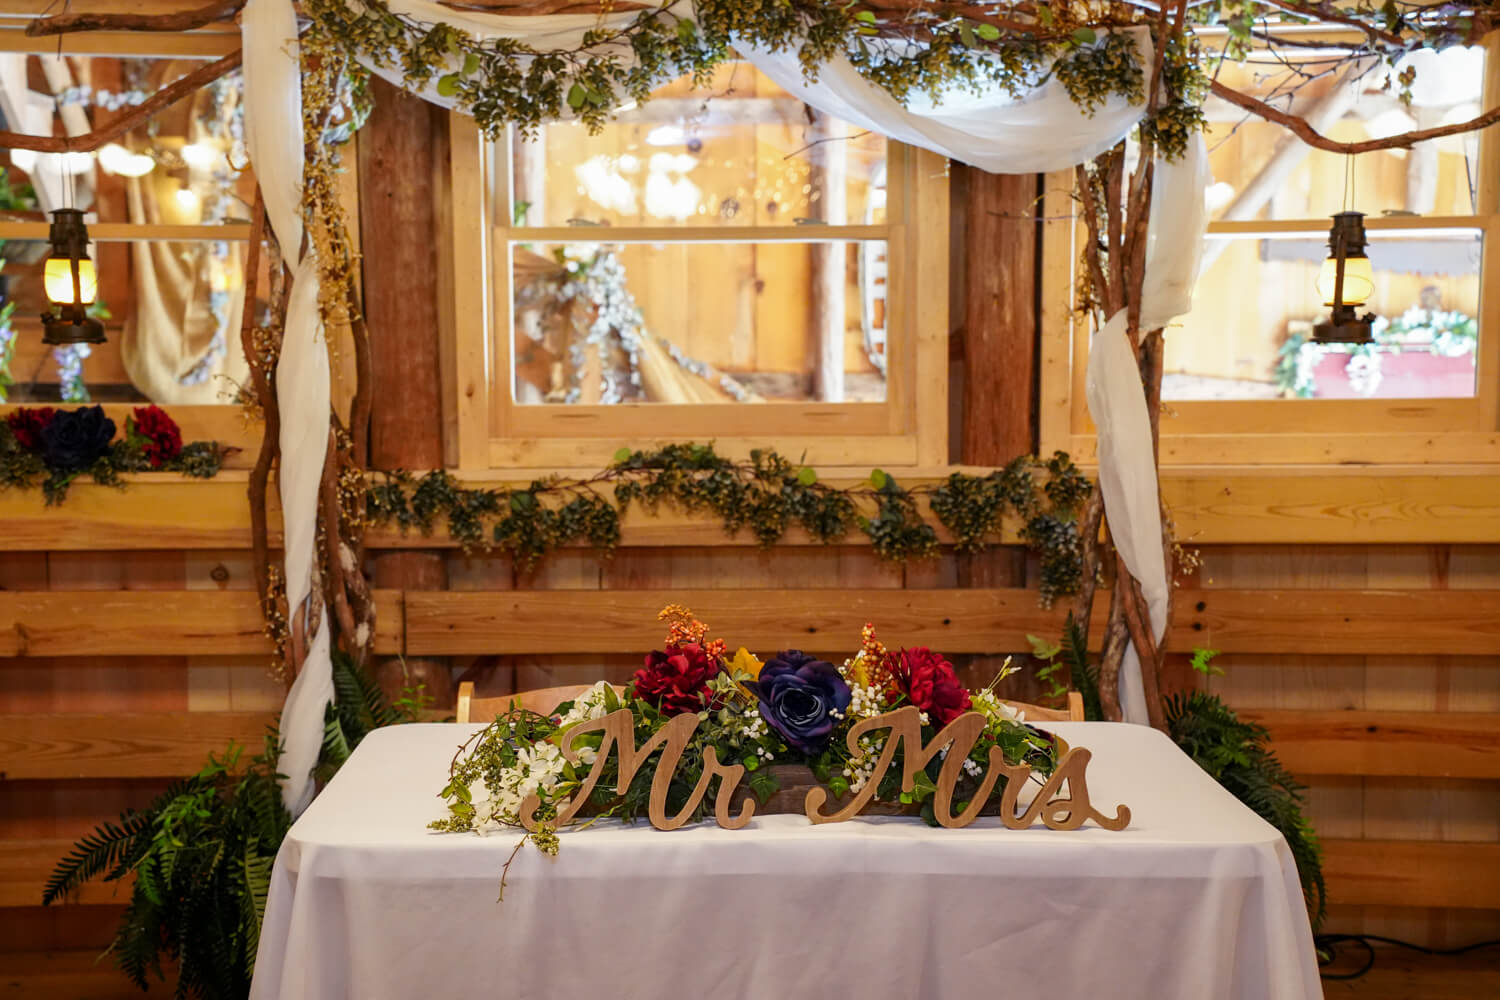 Head table with Mr. and Mrs. Sign in a country barn wedding reception venue